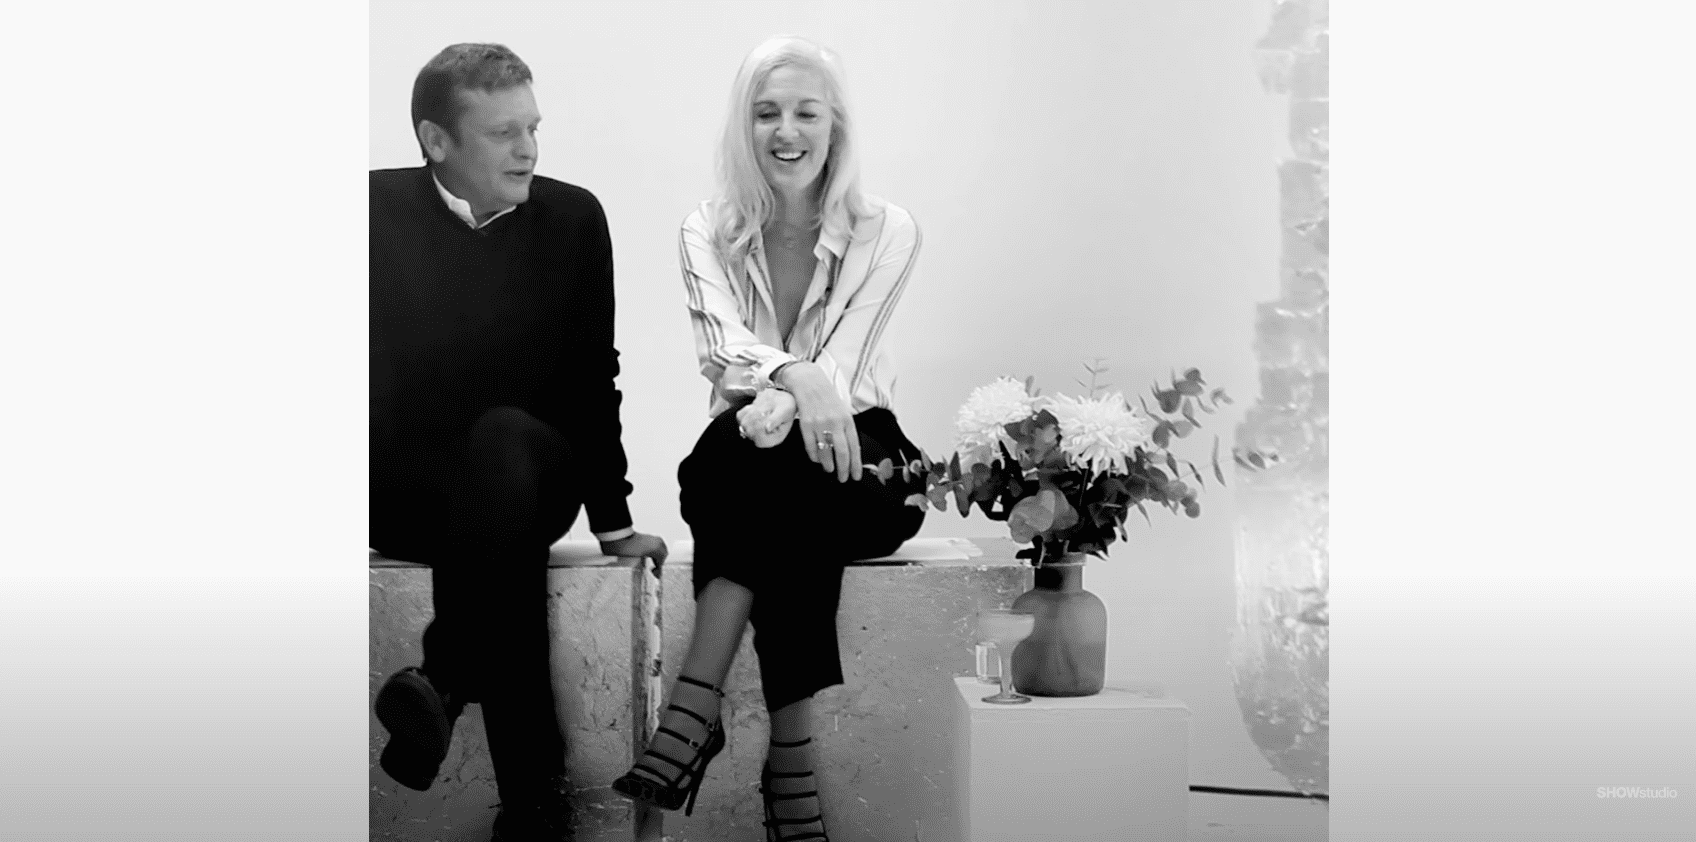 Tom and Ruth Chapman Interview: In Fashion